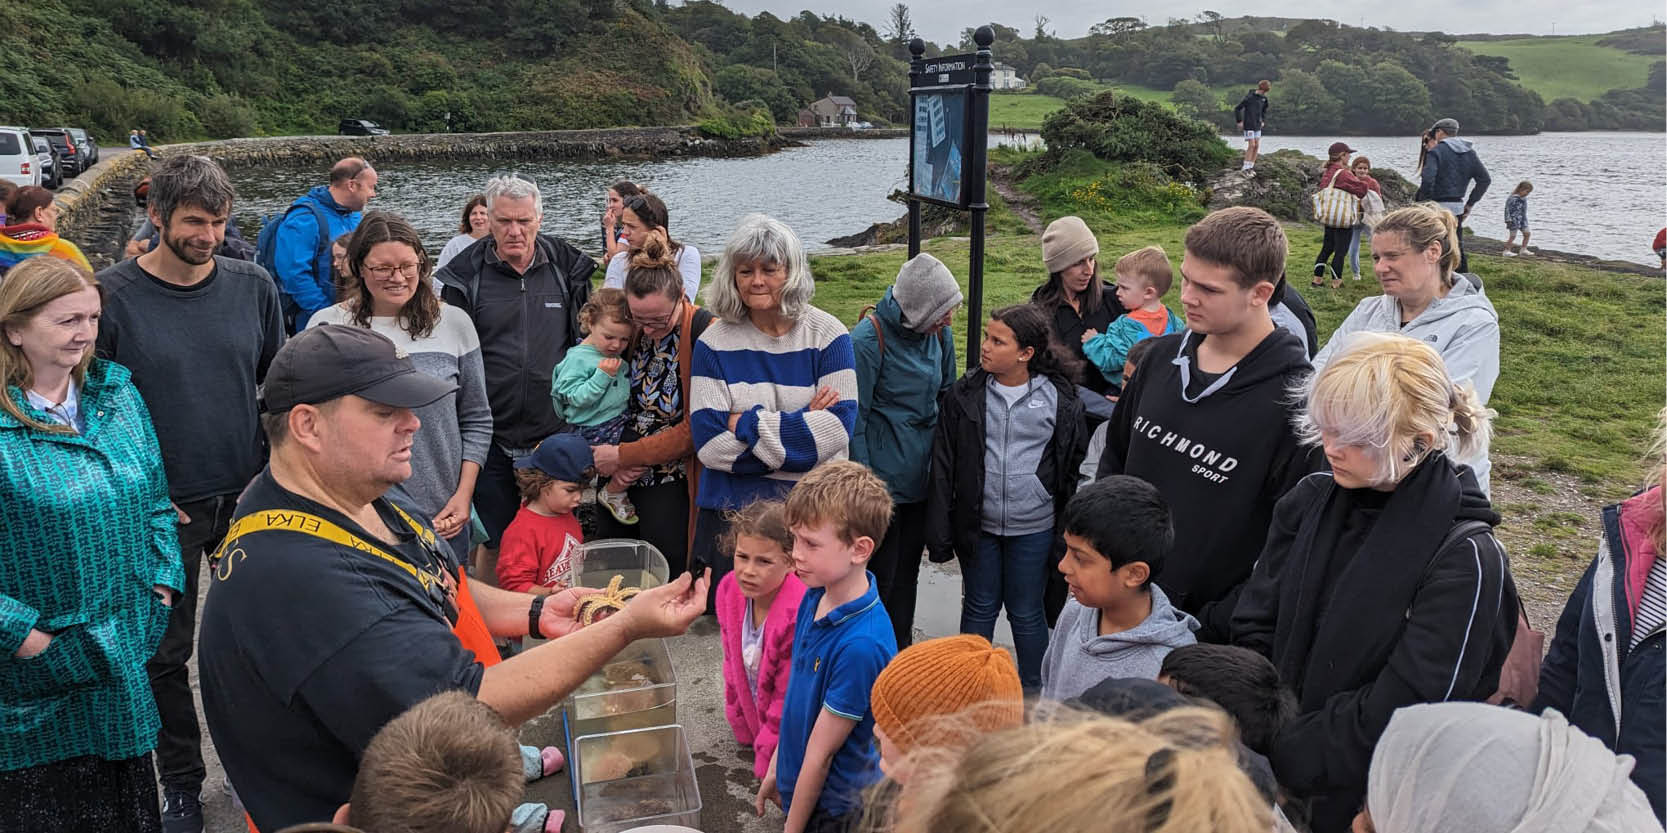 Touch Tanks at Lough Hyne